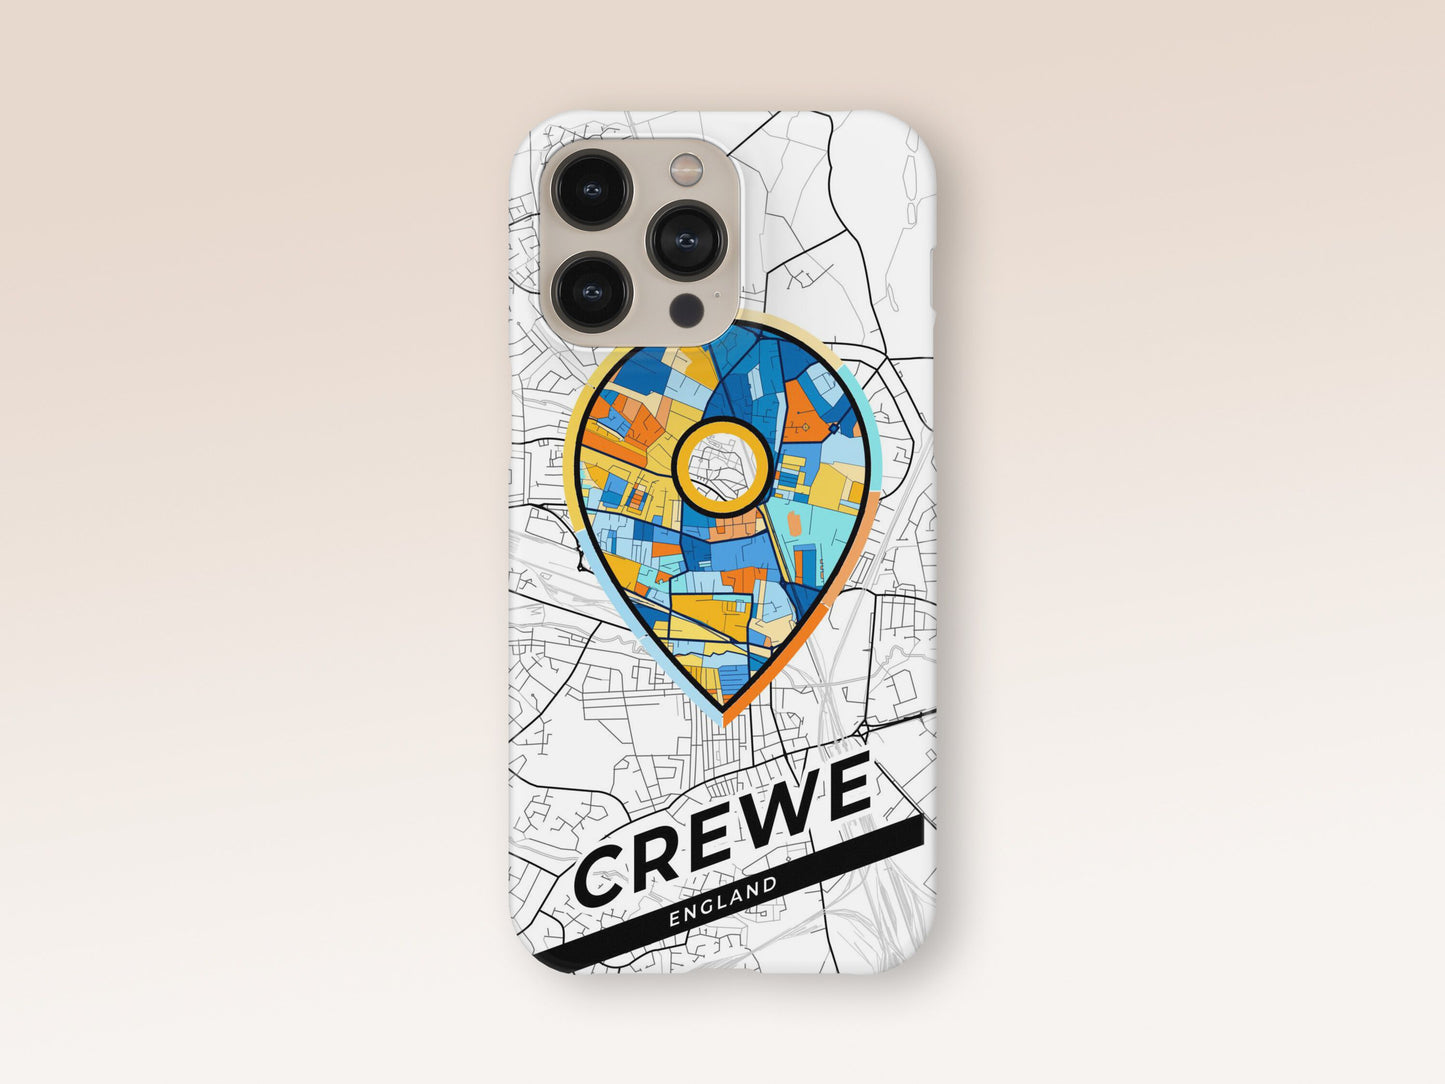 Crewe England slim phone case with colorful icon. Birthday, wedding or housewarming gift. Couple match cases. 1